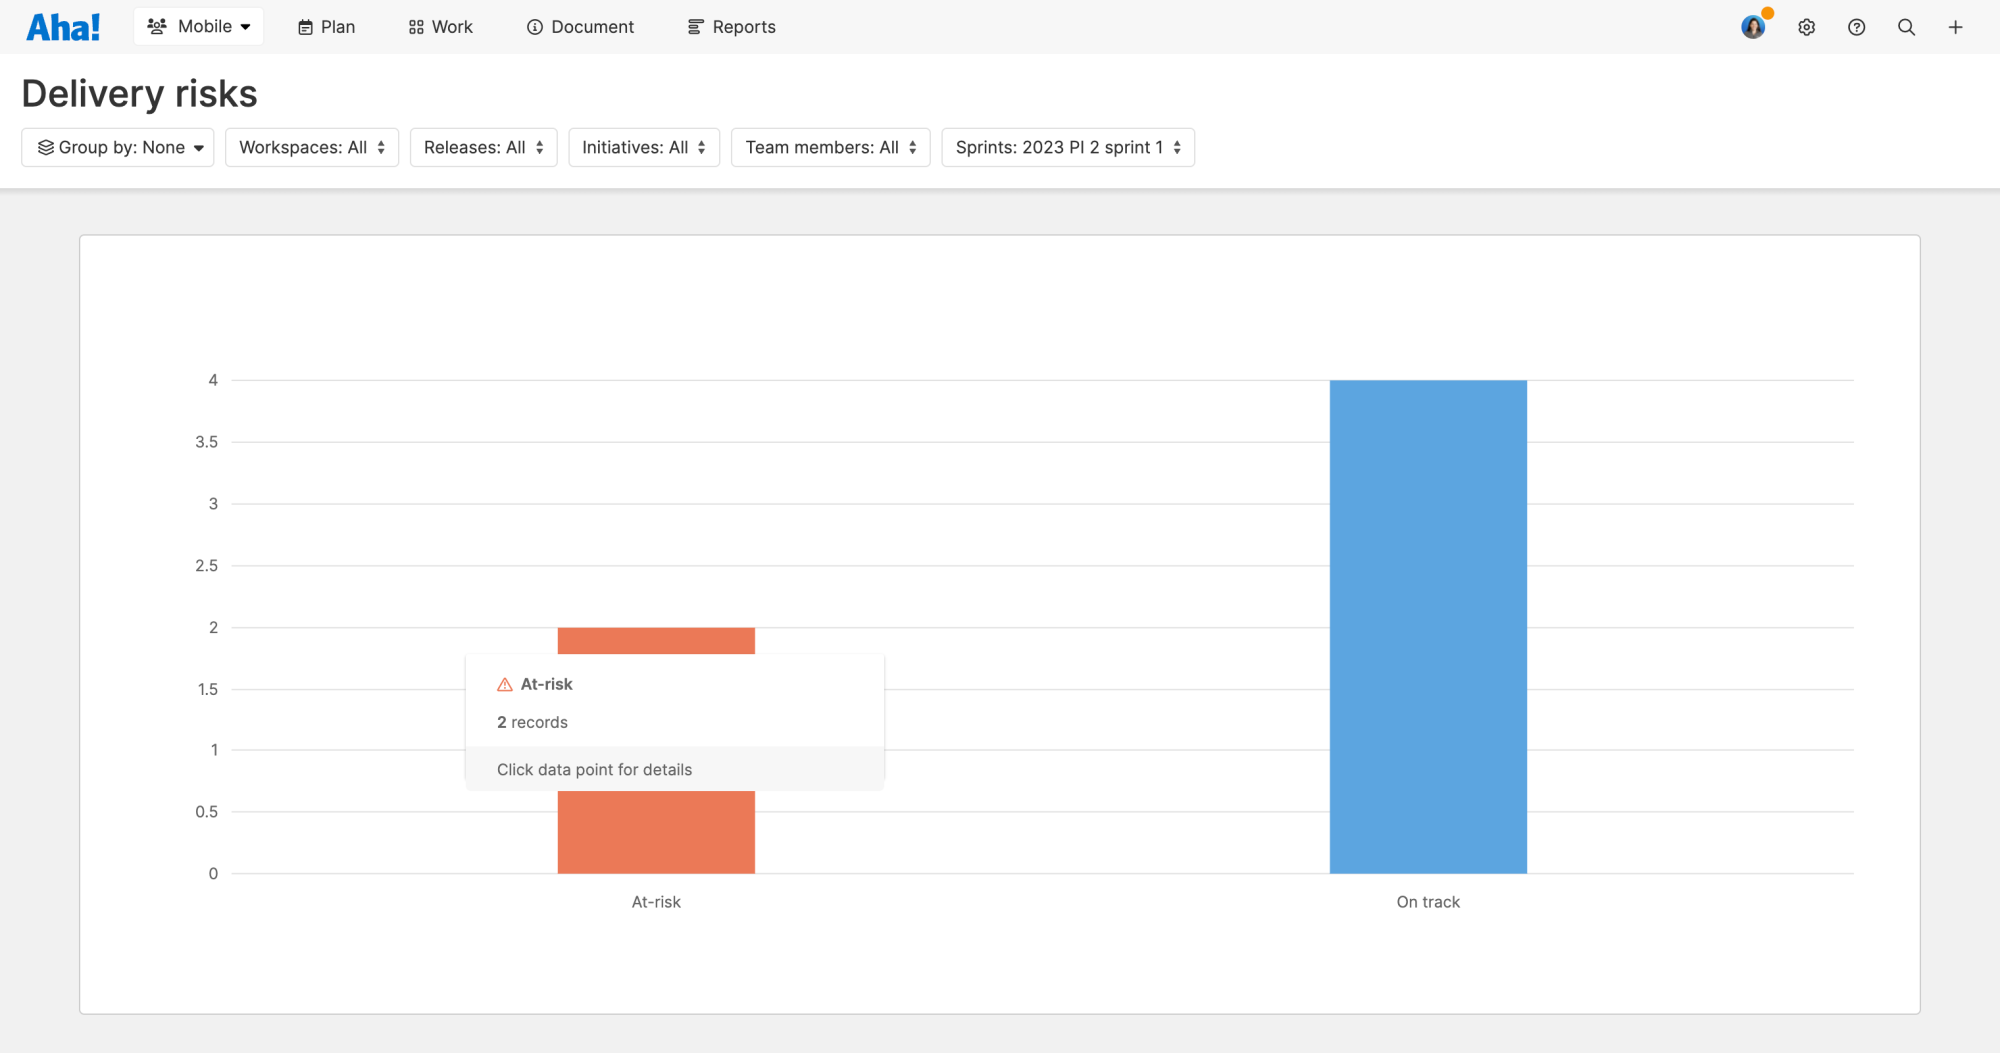 You can also adjust the report filters to view work for different team members or sprints.